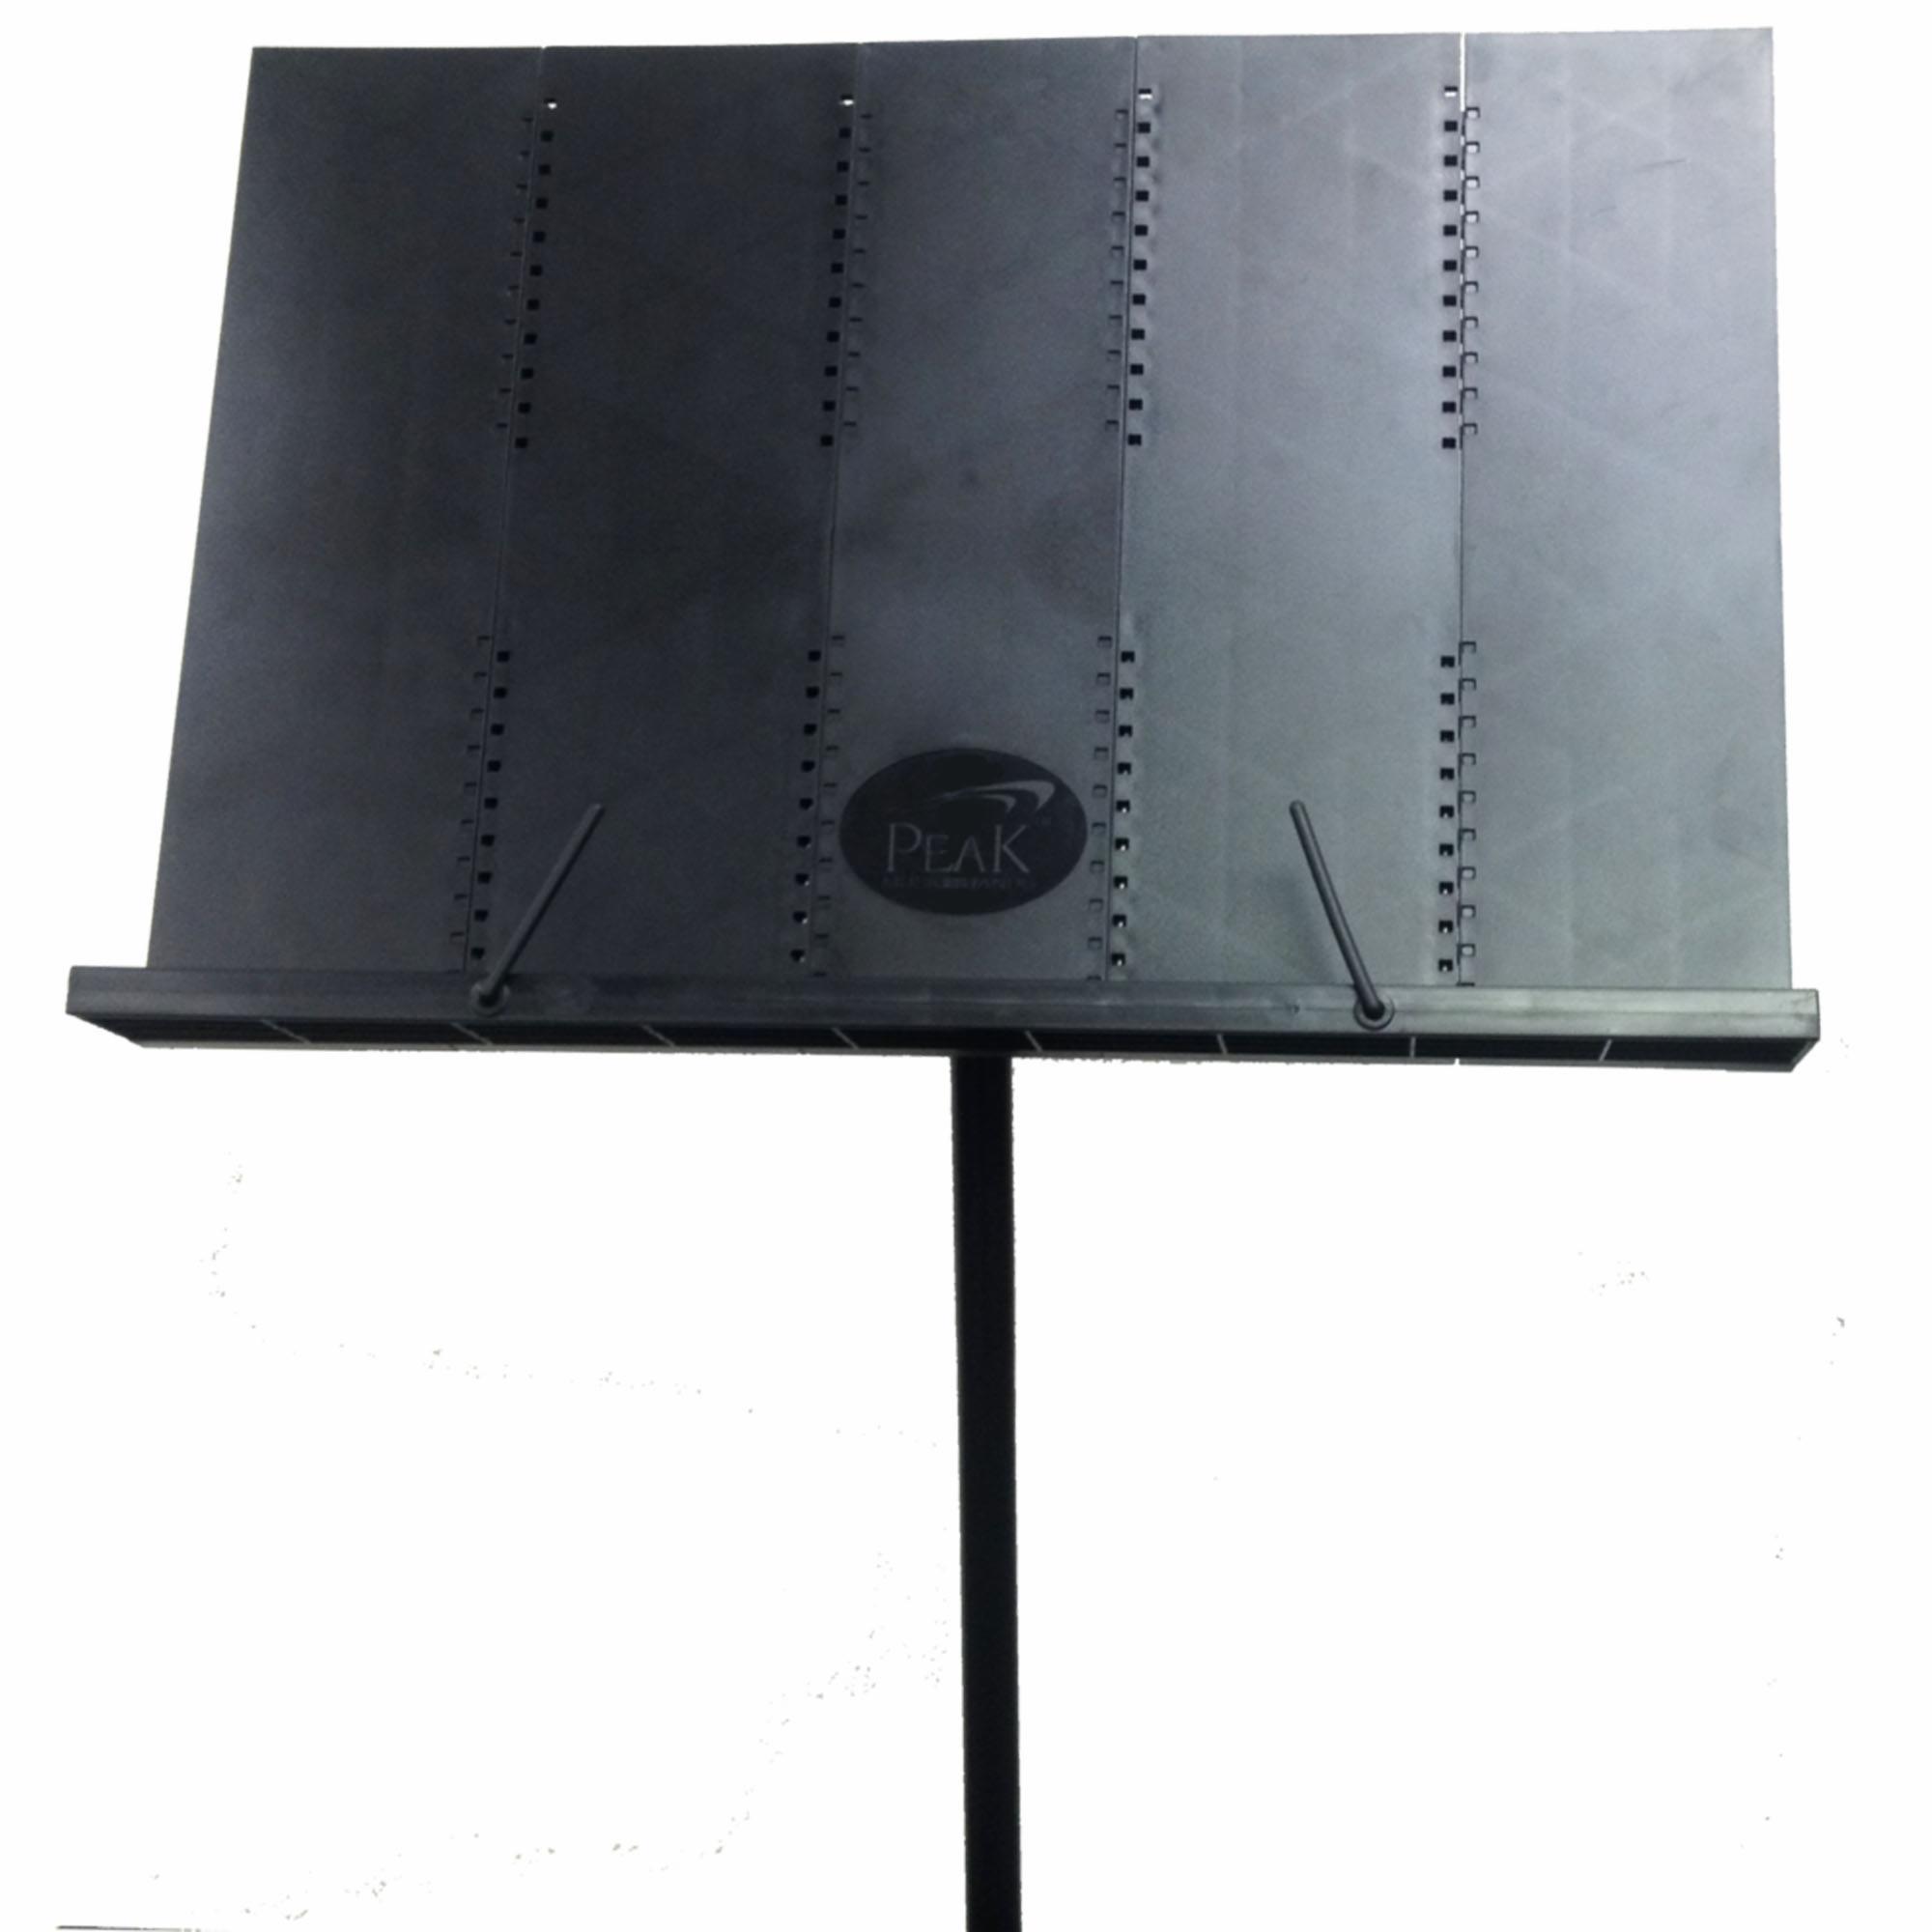 Peak SMS-20 Two Section Steel Music Stand